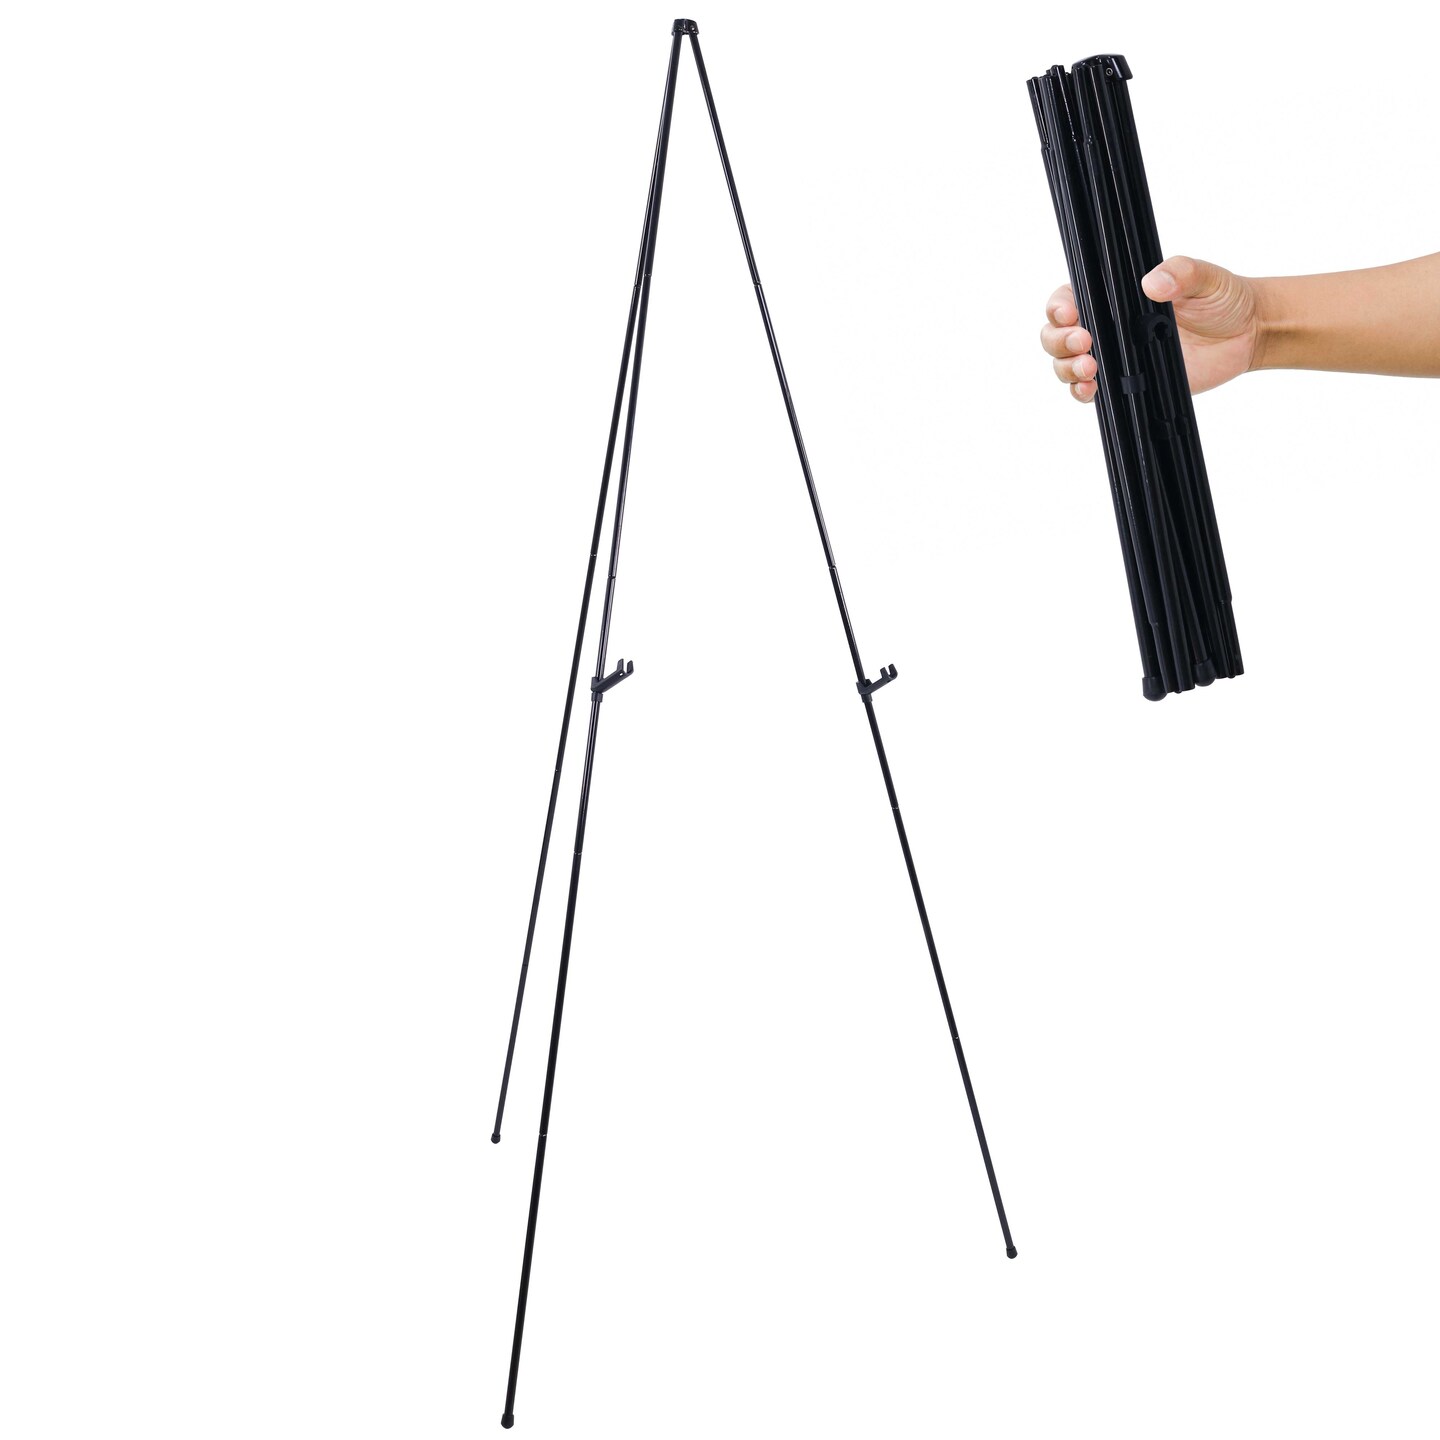 63&#x22; High Steel Easy Folding Display Easel - Quick Set-Up, Instantly Collapses, Adjustable Height Display Holders - Portable Tripod Stand, Event Signs